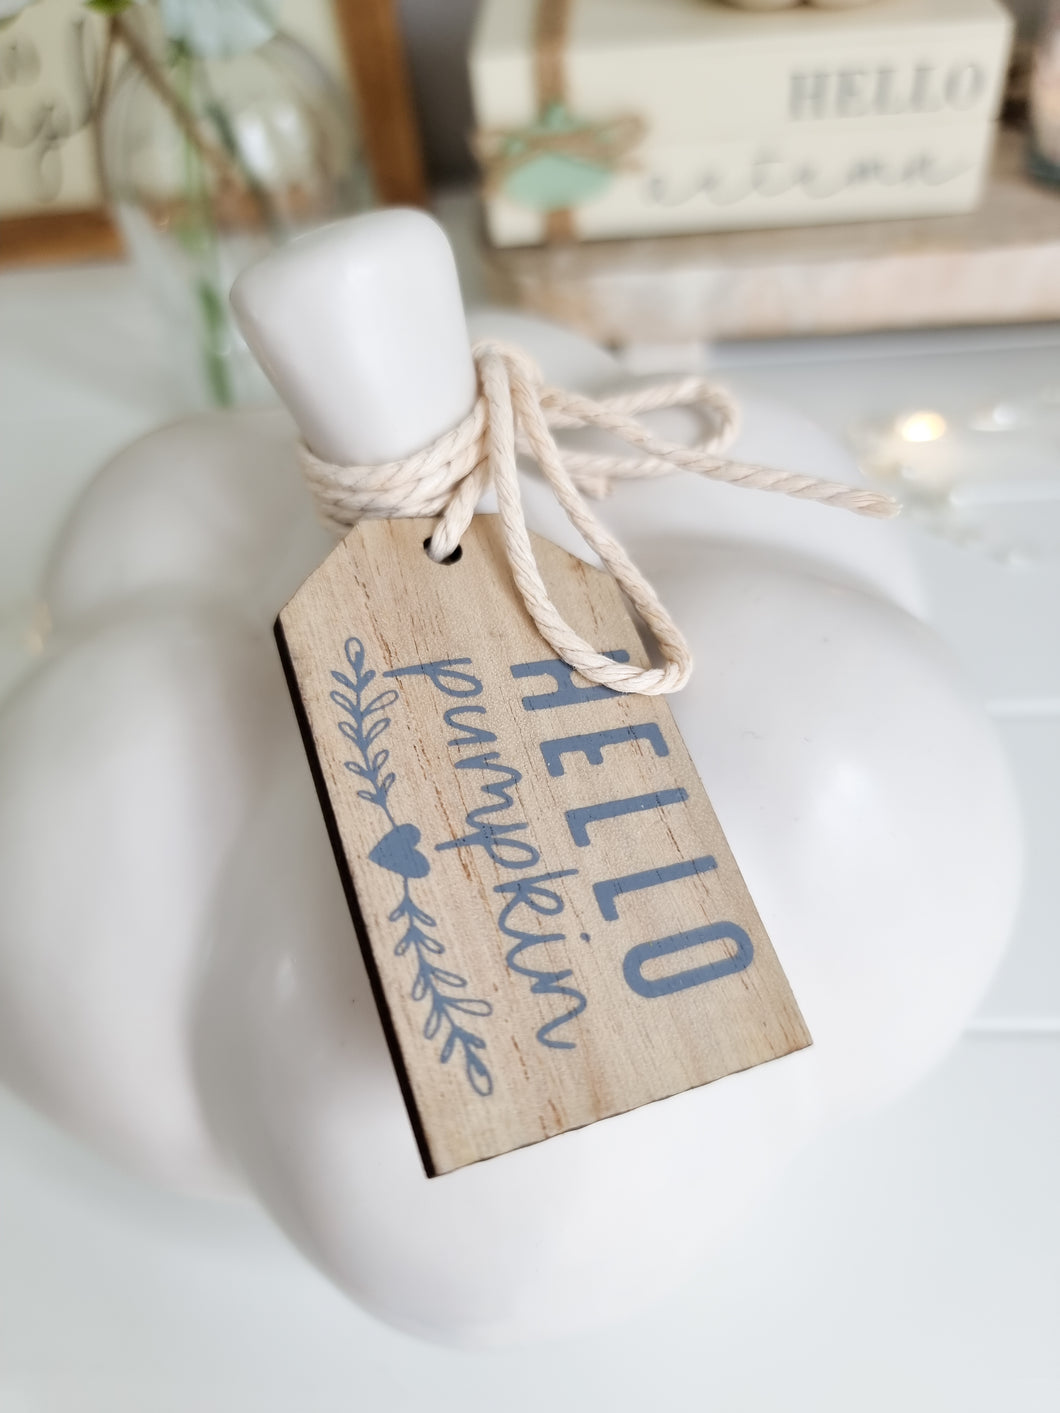 White Ceramic Pumpkin With String Tied Wooden Tag